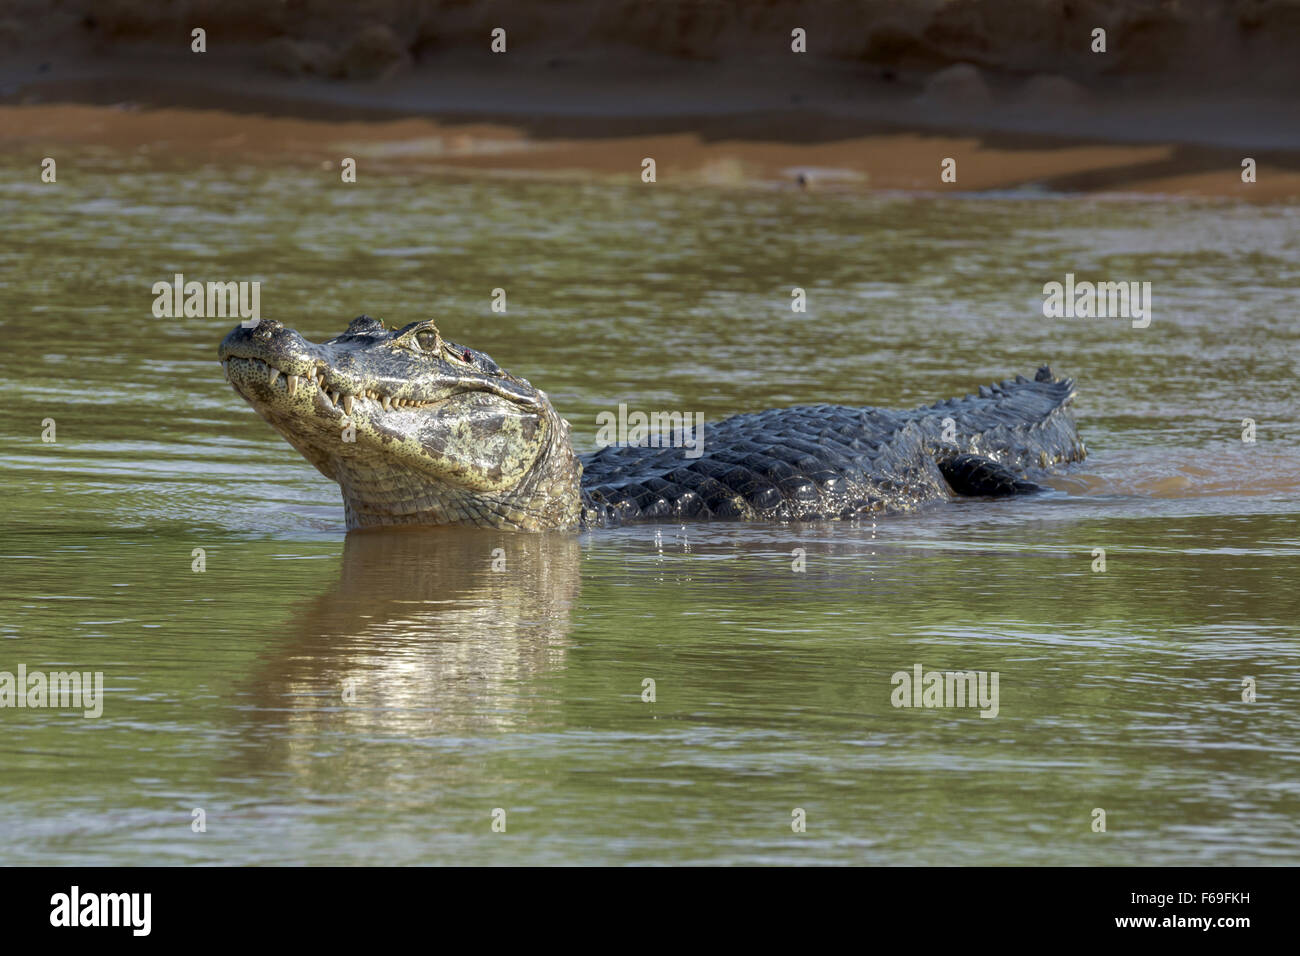 Caiman in the river with its head up, Rio Cuiaba, Pantanal, Brazil Stock Photo